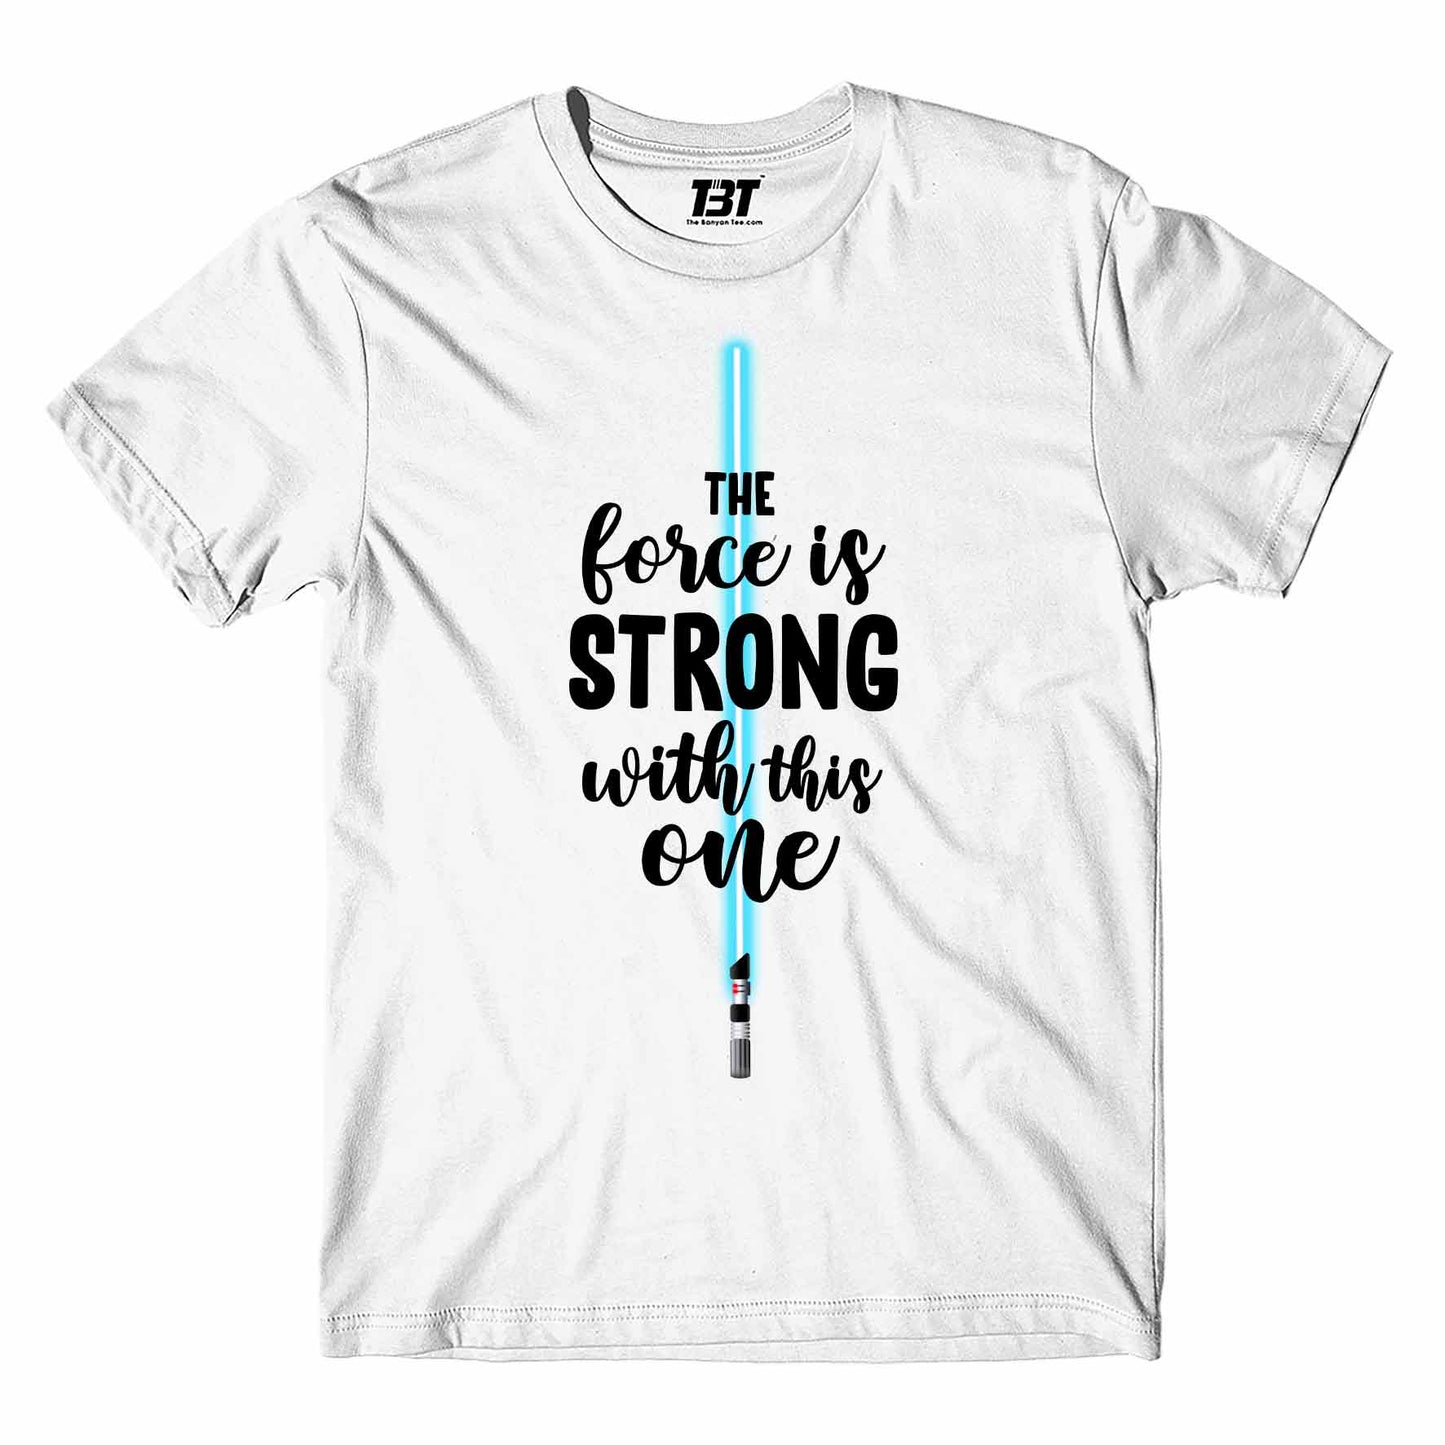 star wars the force is strong with this one t-shirt tv & movies buy online india the banyan tee tbt men women girls boys unisex white